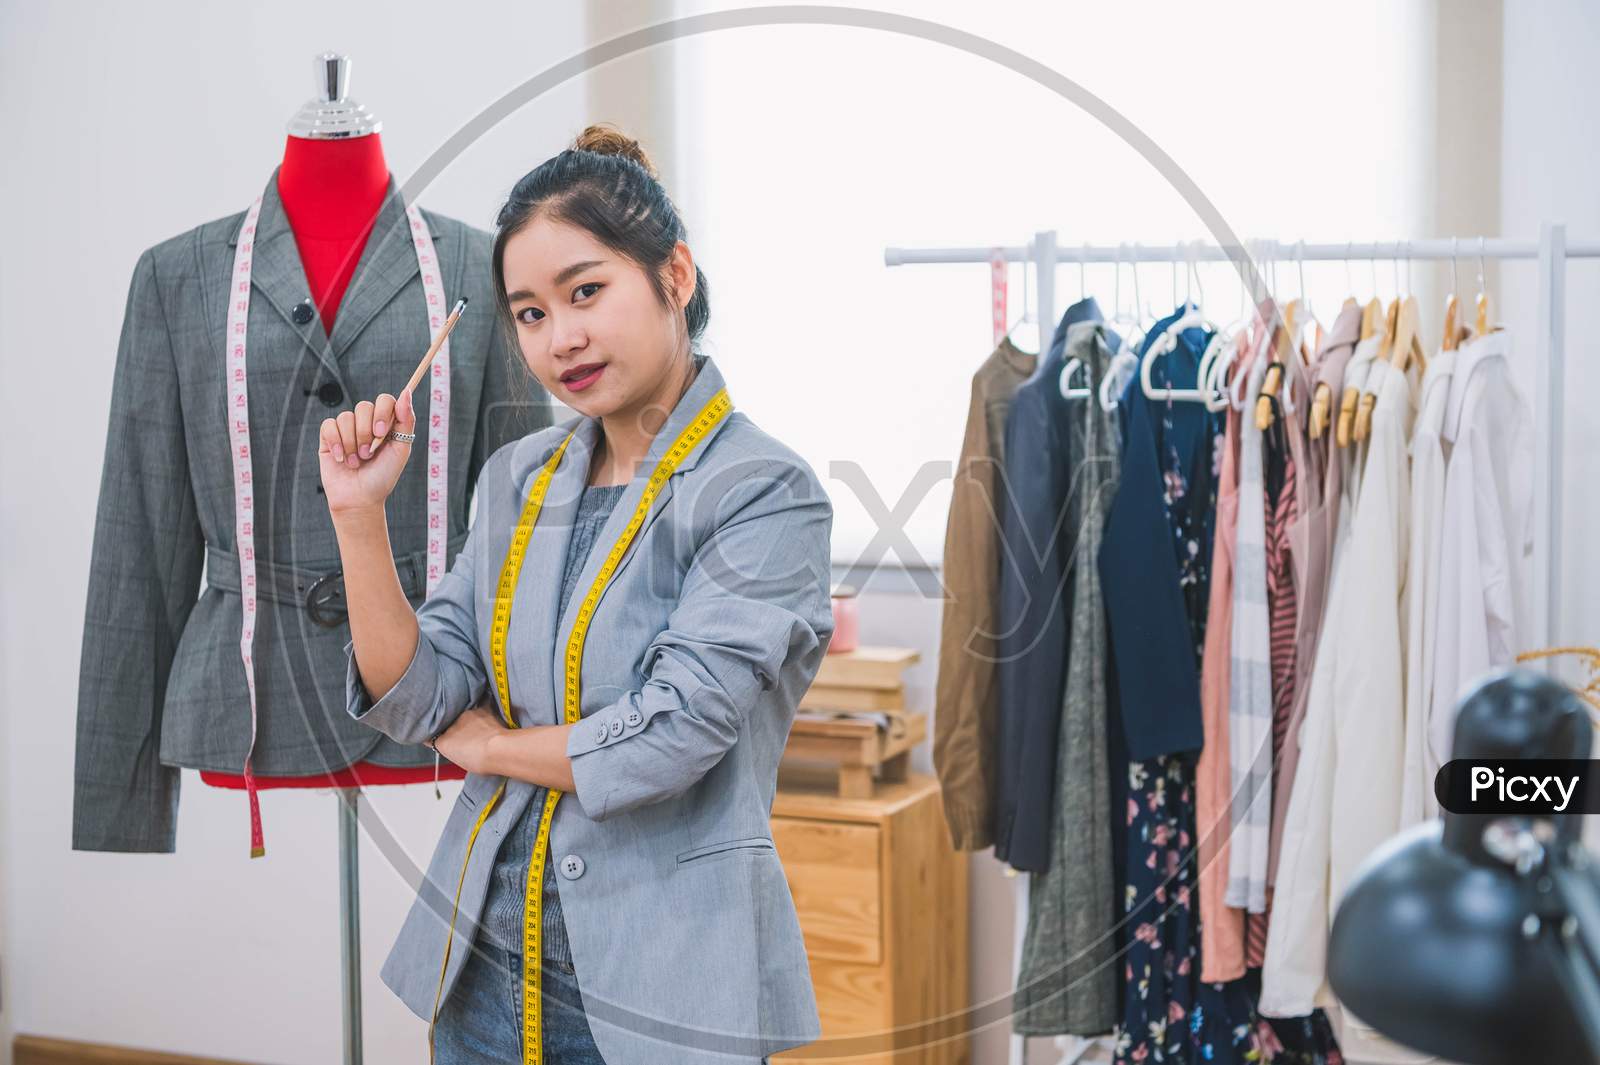 Fashion Designer Stylist In Business Owner Workshop. Tailor And Sewing Concept. Portrait Of Happy Casual Trendy Fashion Designer Businesswoman In Studio Looking Camera. Business Job And Occupation